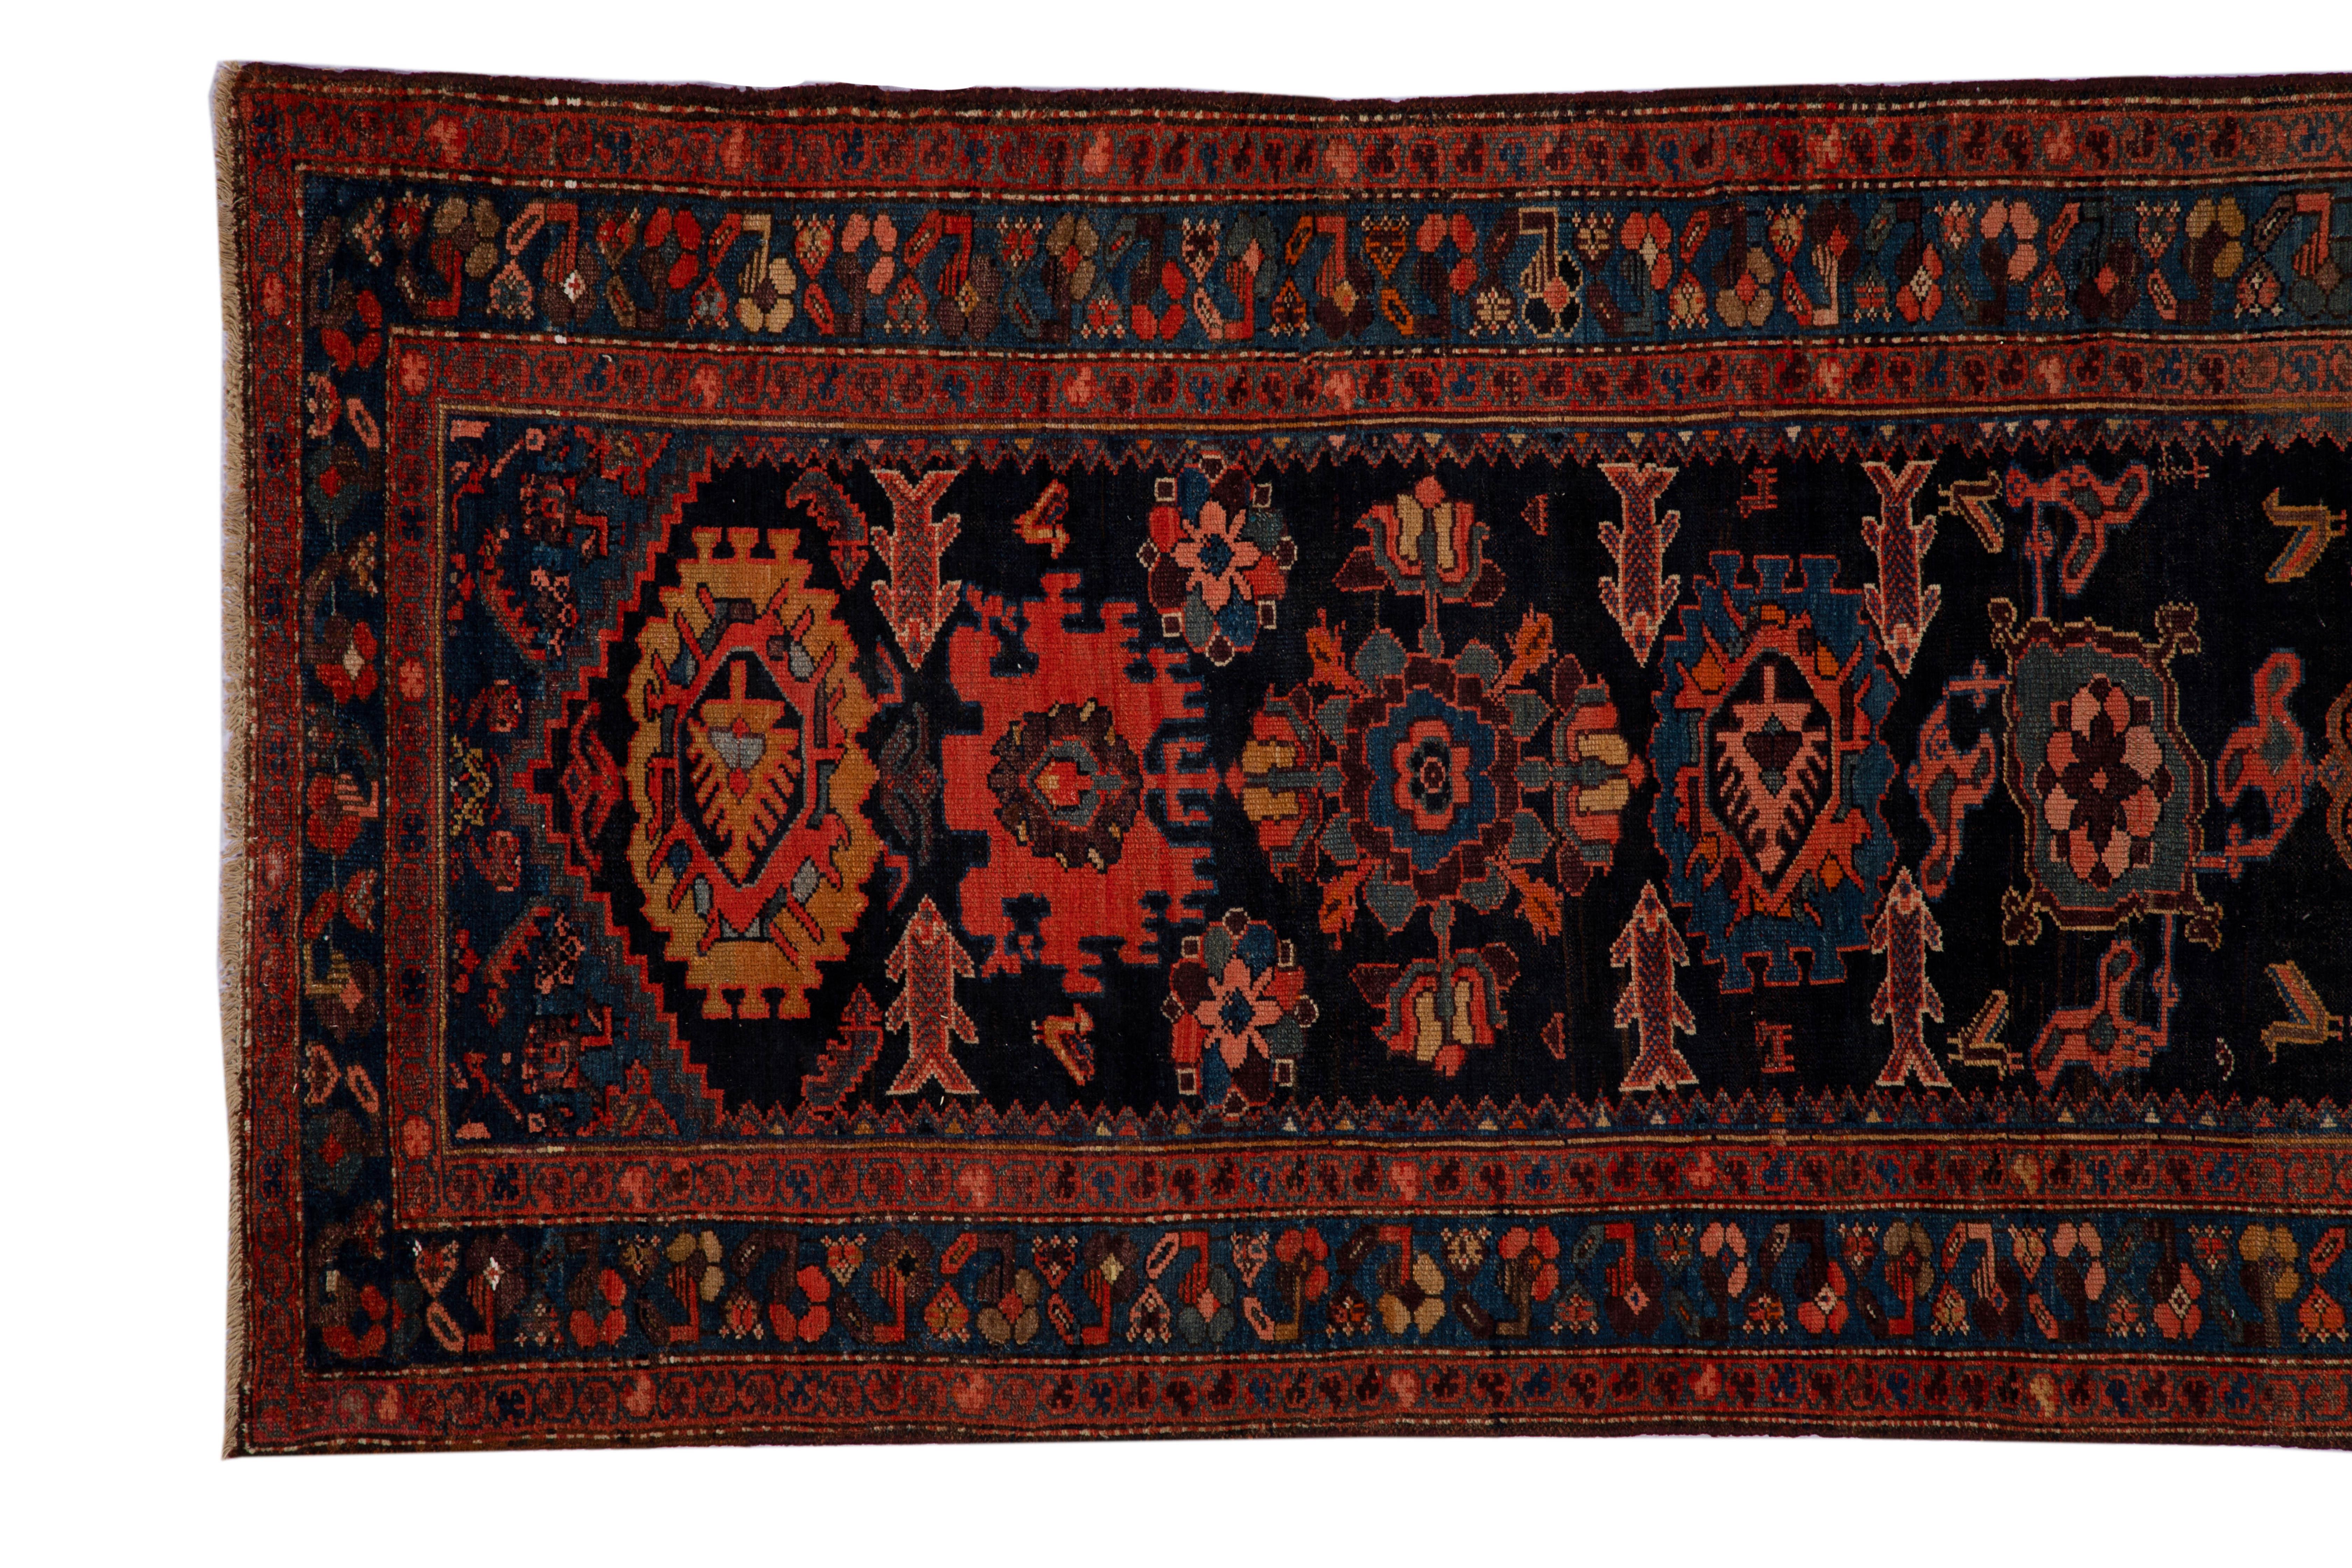 Hand-Woven Antique Persian Zanjan Runner Rug in Black and Red with Allover Design Details  For Sale